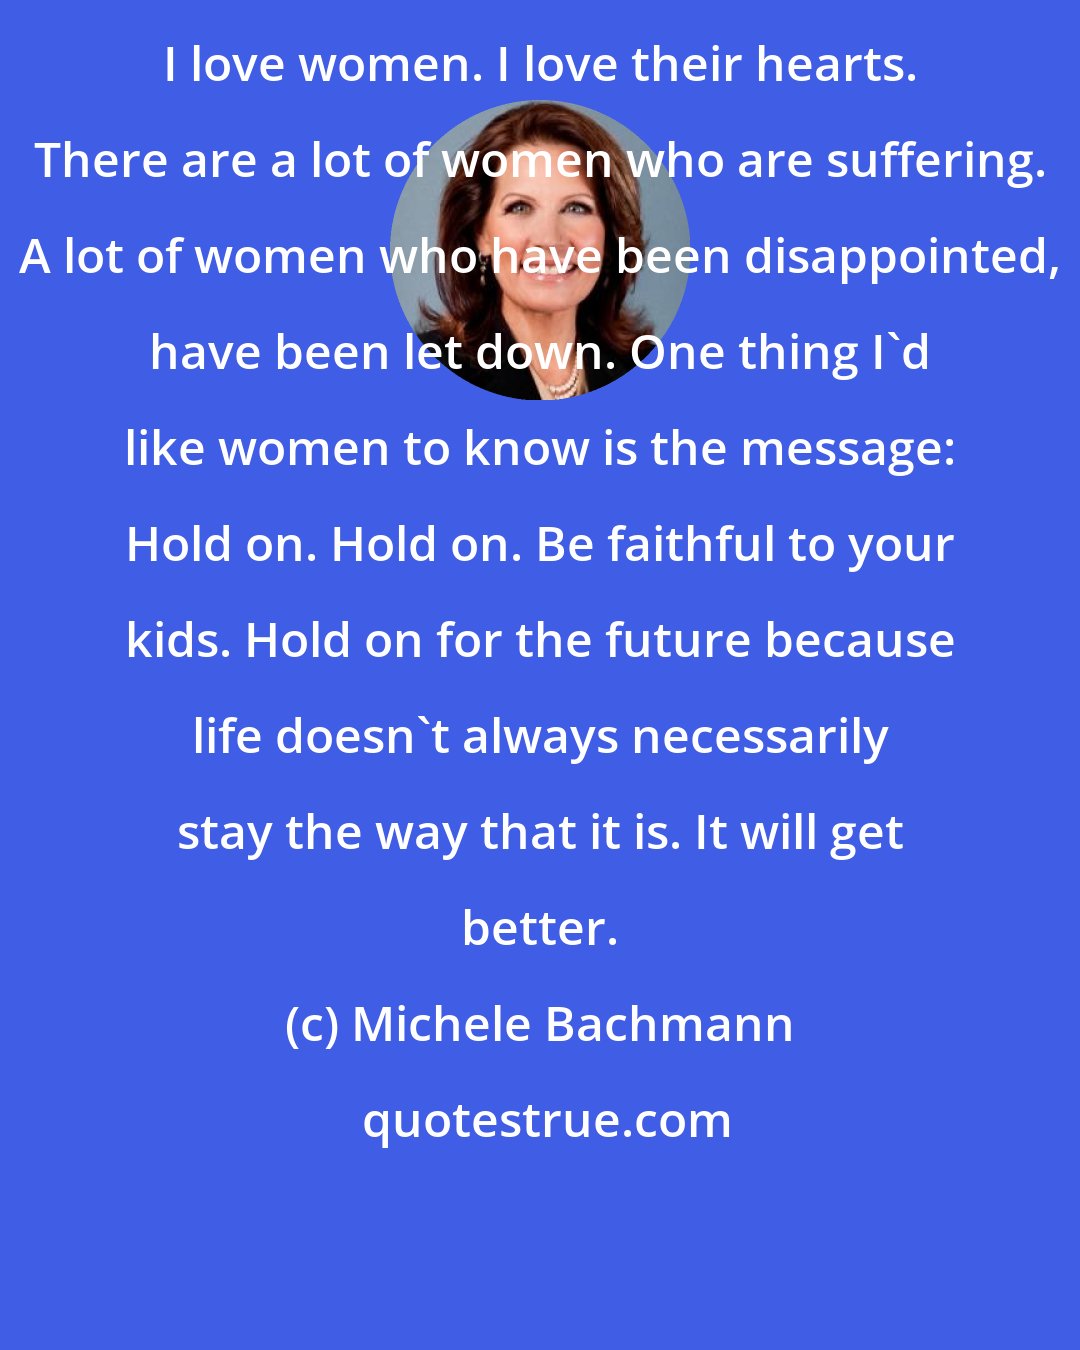 Michele Bachmann: I love women. I love their hearts. There are a lot of women who are suffering. A lot of women who have been disappointed, have been let down. One thing I'd like women to know is the message: Hold on. Hold on. Be faithful to your kids. Hold on for the future because life doesn't always necessarily stay the way that it is. It will get better.